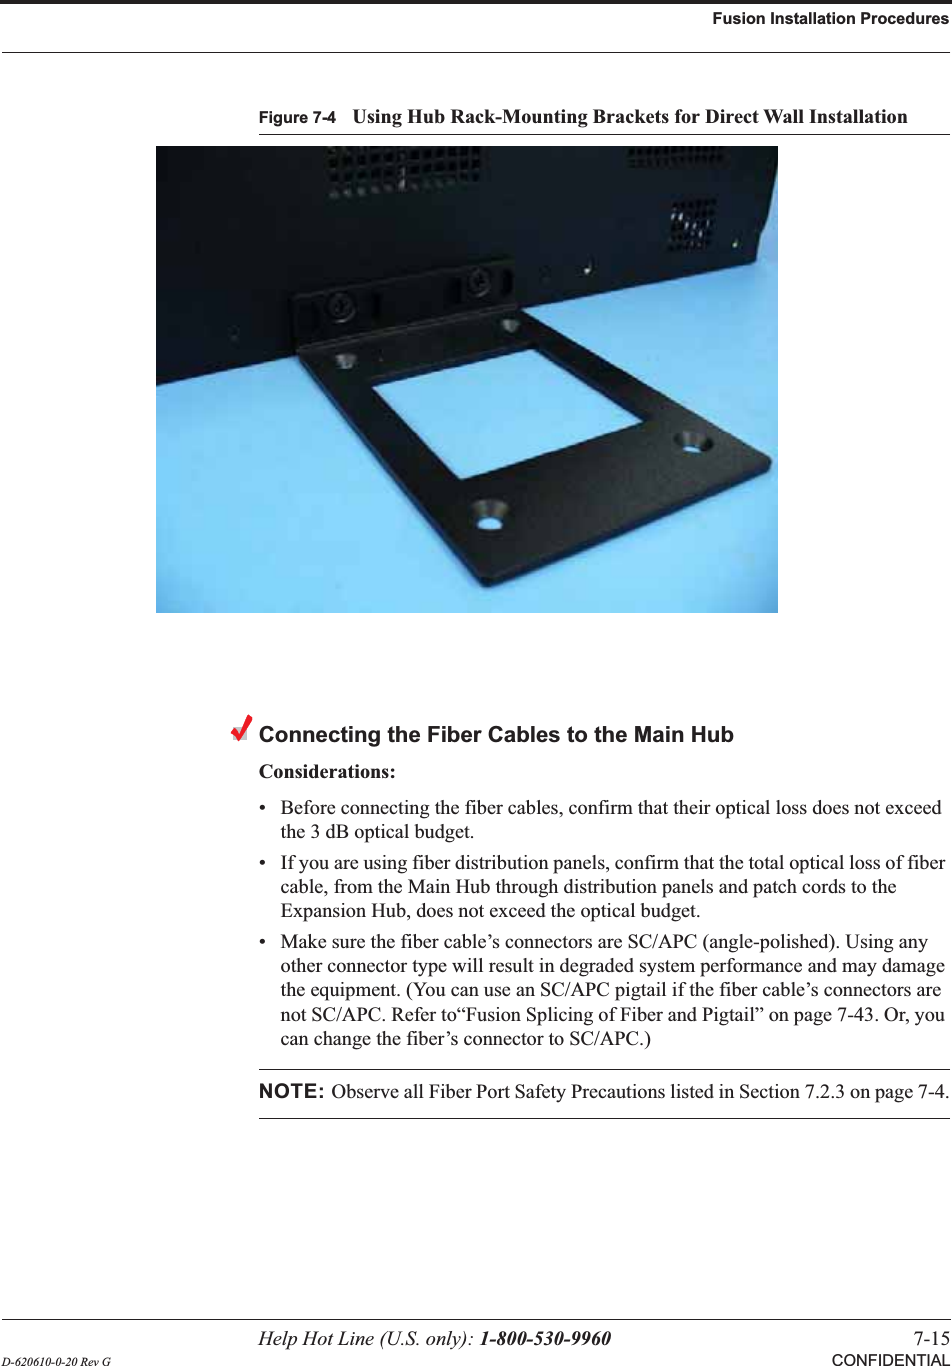 Help Hot Line (U.S. only): 1-800-530-9960 7-15D-620610-0-20 Rev G CONFIDENTIALFusion Installation ProceduresFigure 7-4 Using Hub Rack-Mounting Brackets for Direct Wall InstallationConnecting the Fiber Cables to the Main HubConsiderations:• Before connecting the fiber cables, confirm that their optical loss does not exceed the 3 dB optical budget.• If you are using fiber distribution panels, confirm that the total optical loss of fiber cable, from the Main Hub through distribution panels and patch cords to the Expansion Hub, does not exceed the optical budget.• Make sure the fiber cable’s connectors are SC/APC (angle-polished). Using any other connector type will result in degraded system performance and may damage the equipment. (You can use an SC/APC pigtail if the fiber cable’s connectors are not SC/APC. Refer to“Fusion Splicing of Fiber and Pigtail” on page 7-43. Or, you can change the fiber’s connector to SC/APC.)NOTE: Observe all Fiber Port Safety Precautions listed in Section 7.2.3 on page 7-4.